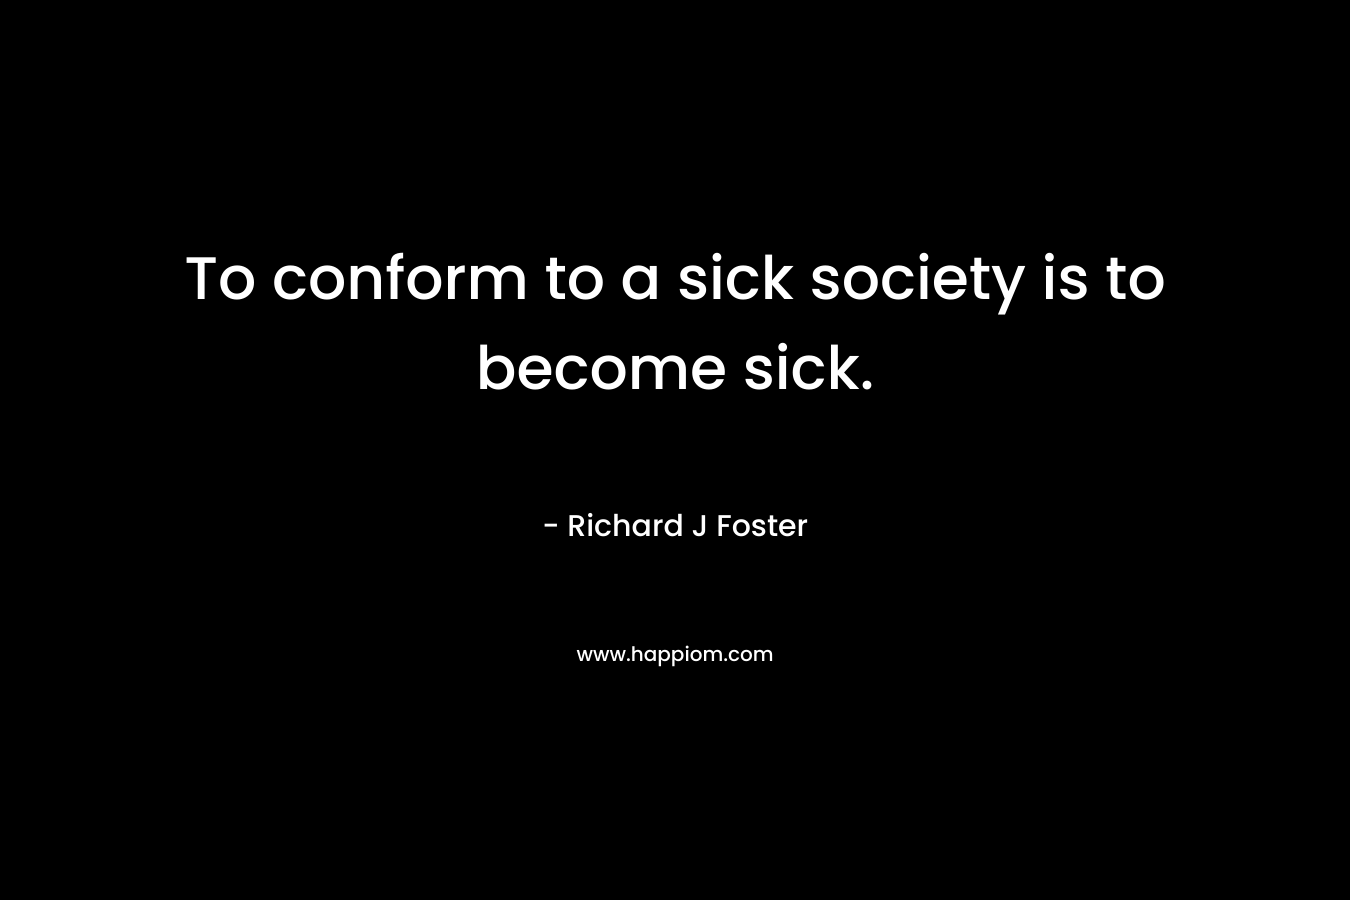 To conform to a sick society is to become sick.